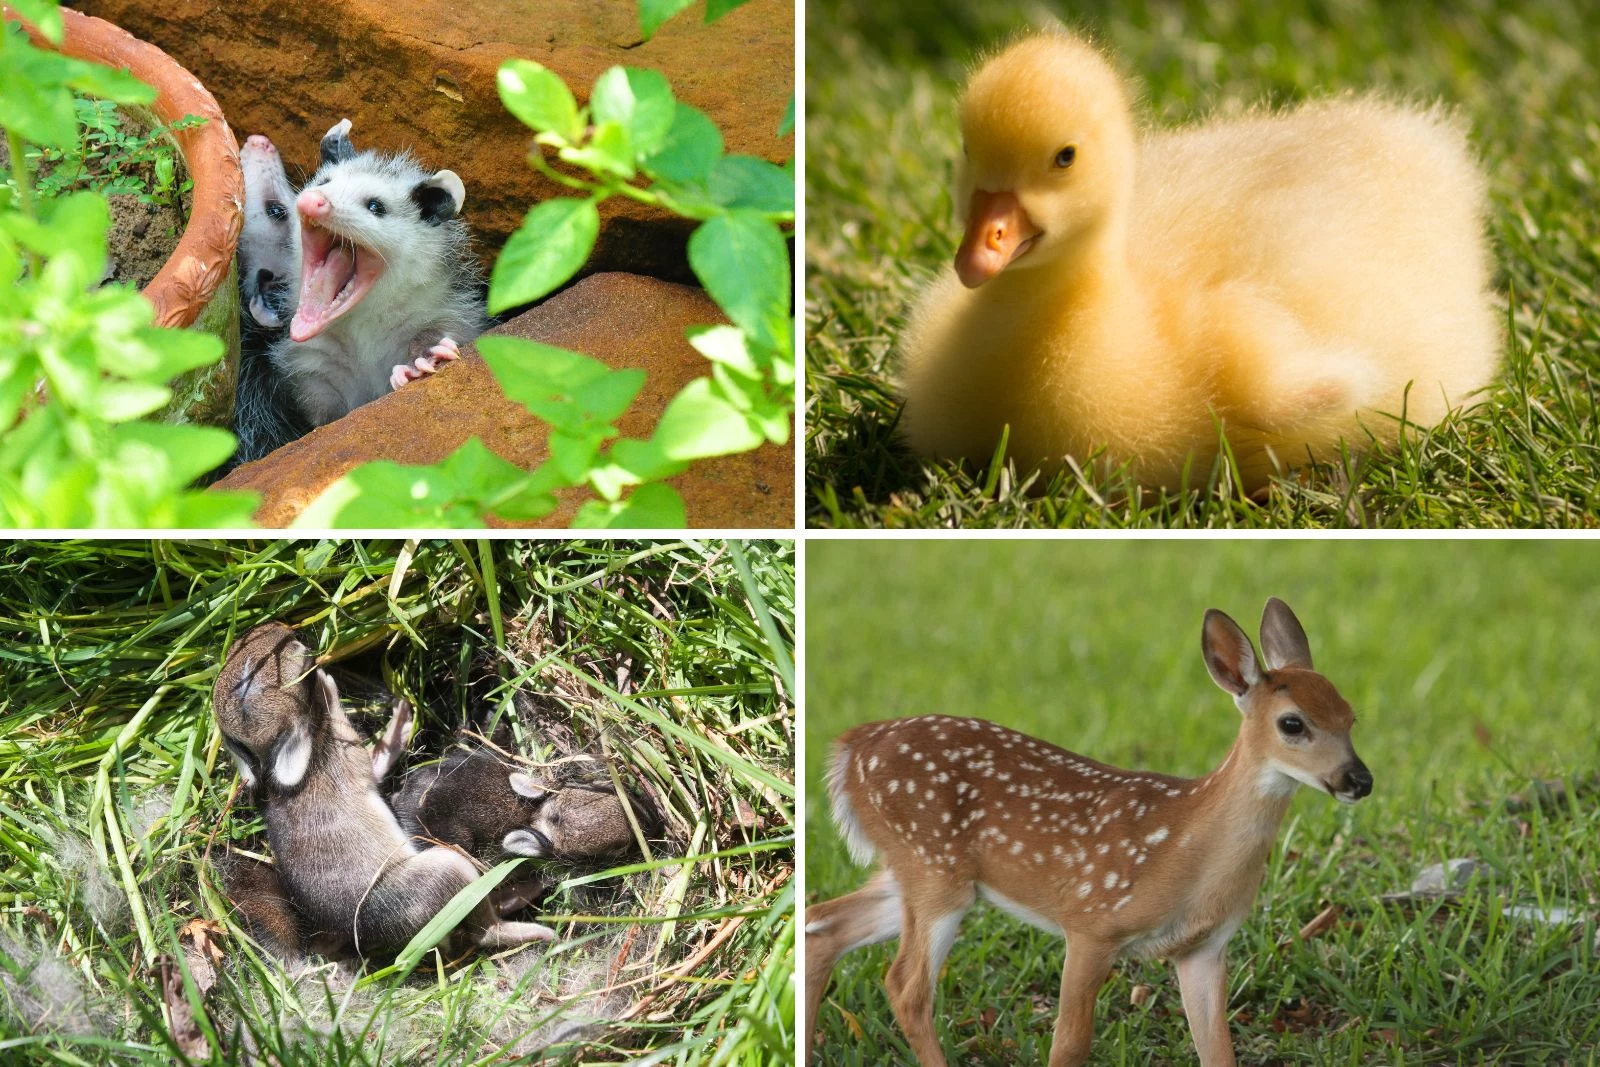 What To Do If You Find An ‘Abandoned’ Baby Animal in Michigan